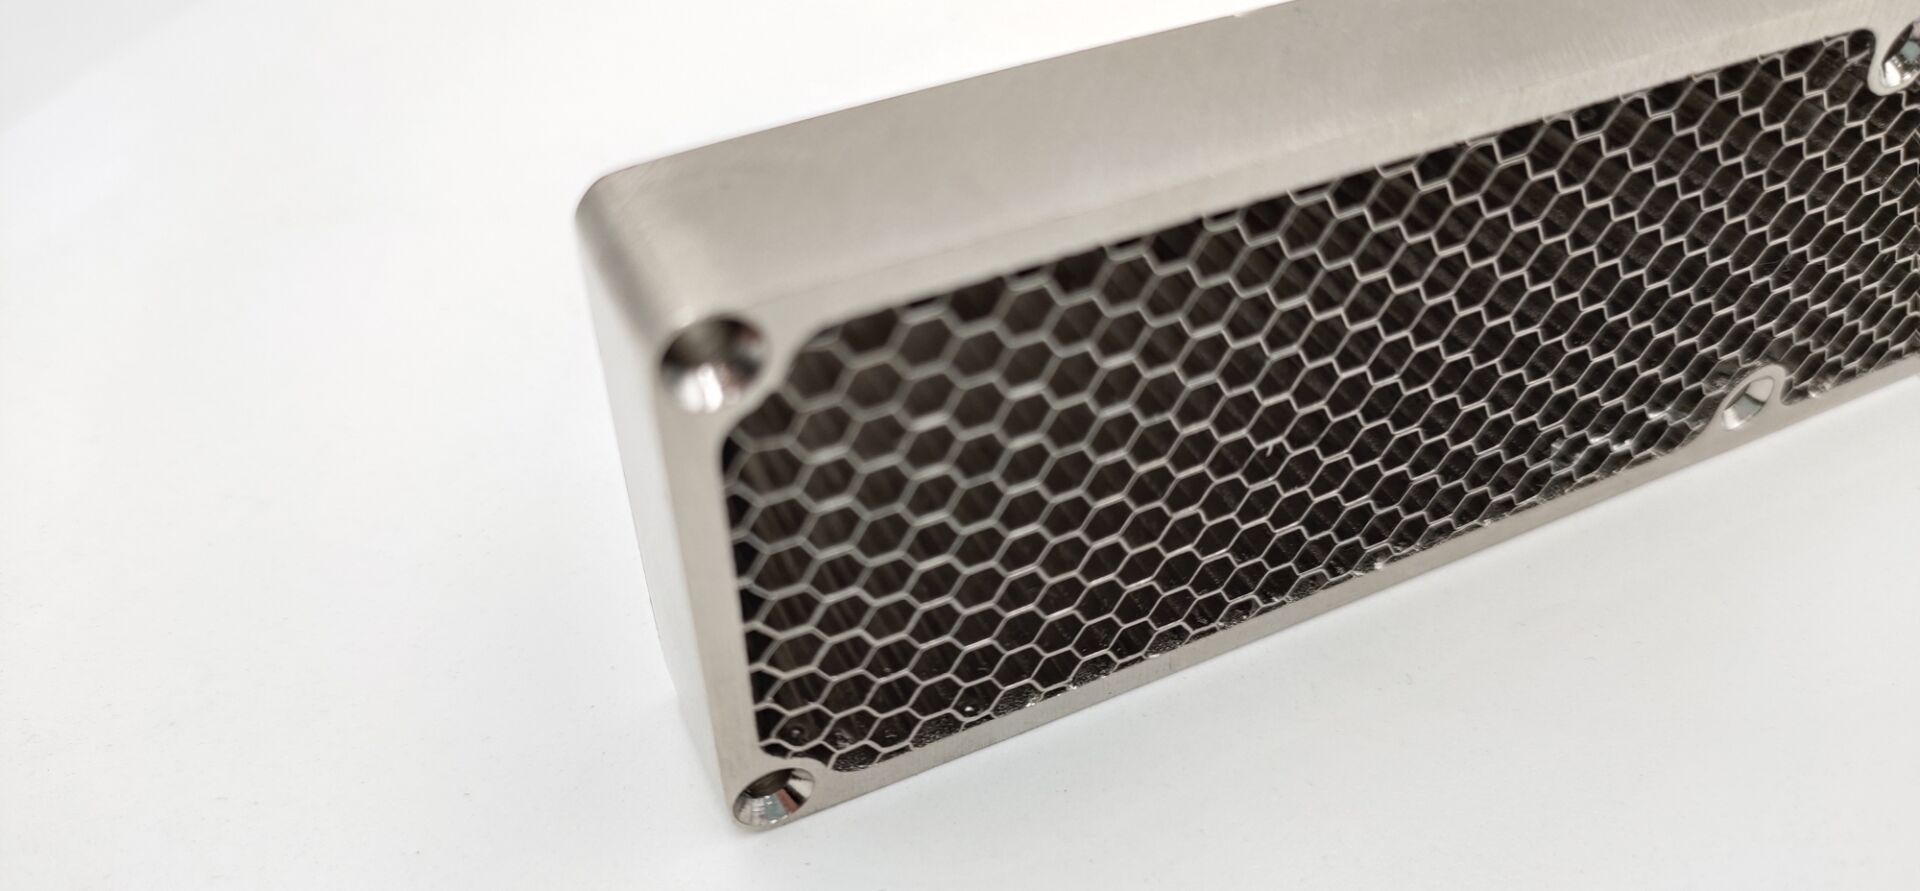 316 Stainless Steel Honeycomb Core Can Be Customized With Various Borders